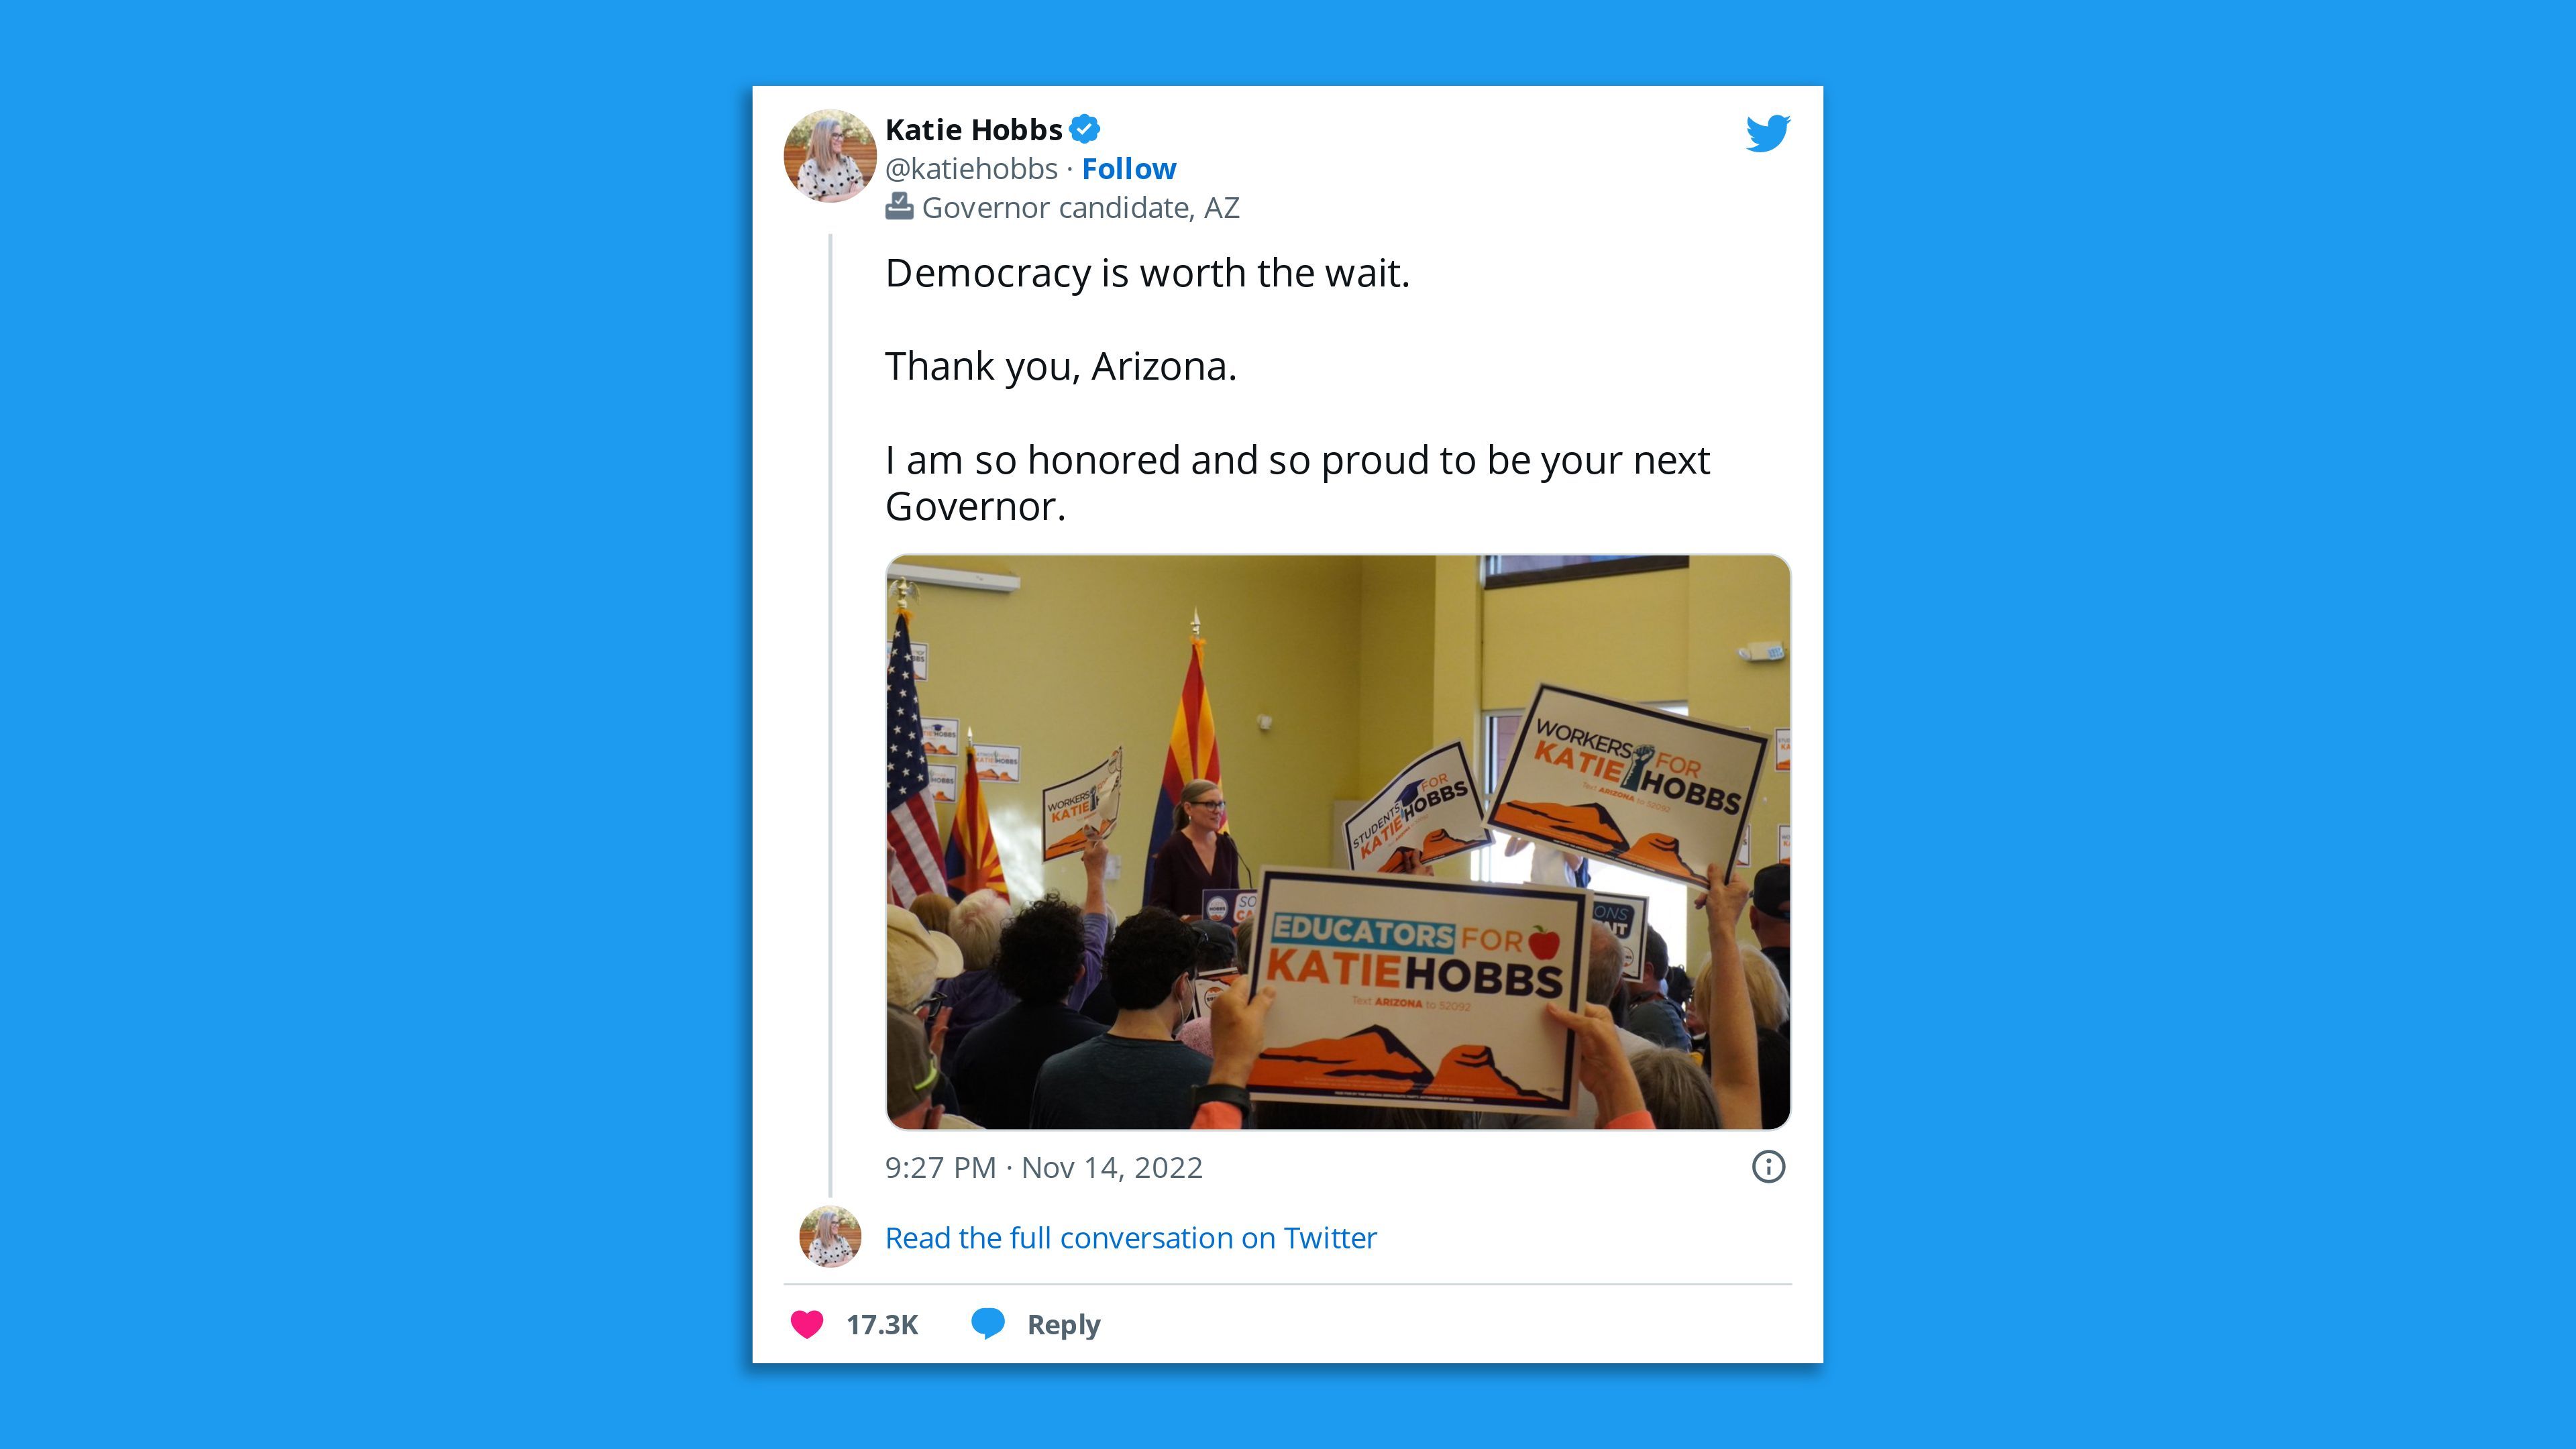 A  screenshot of a tweet from Katie Hobbs saying "Democracy is worth the wait. Thank you, Arizona. I am so honored and so proud to be your next Governor."